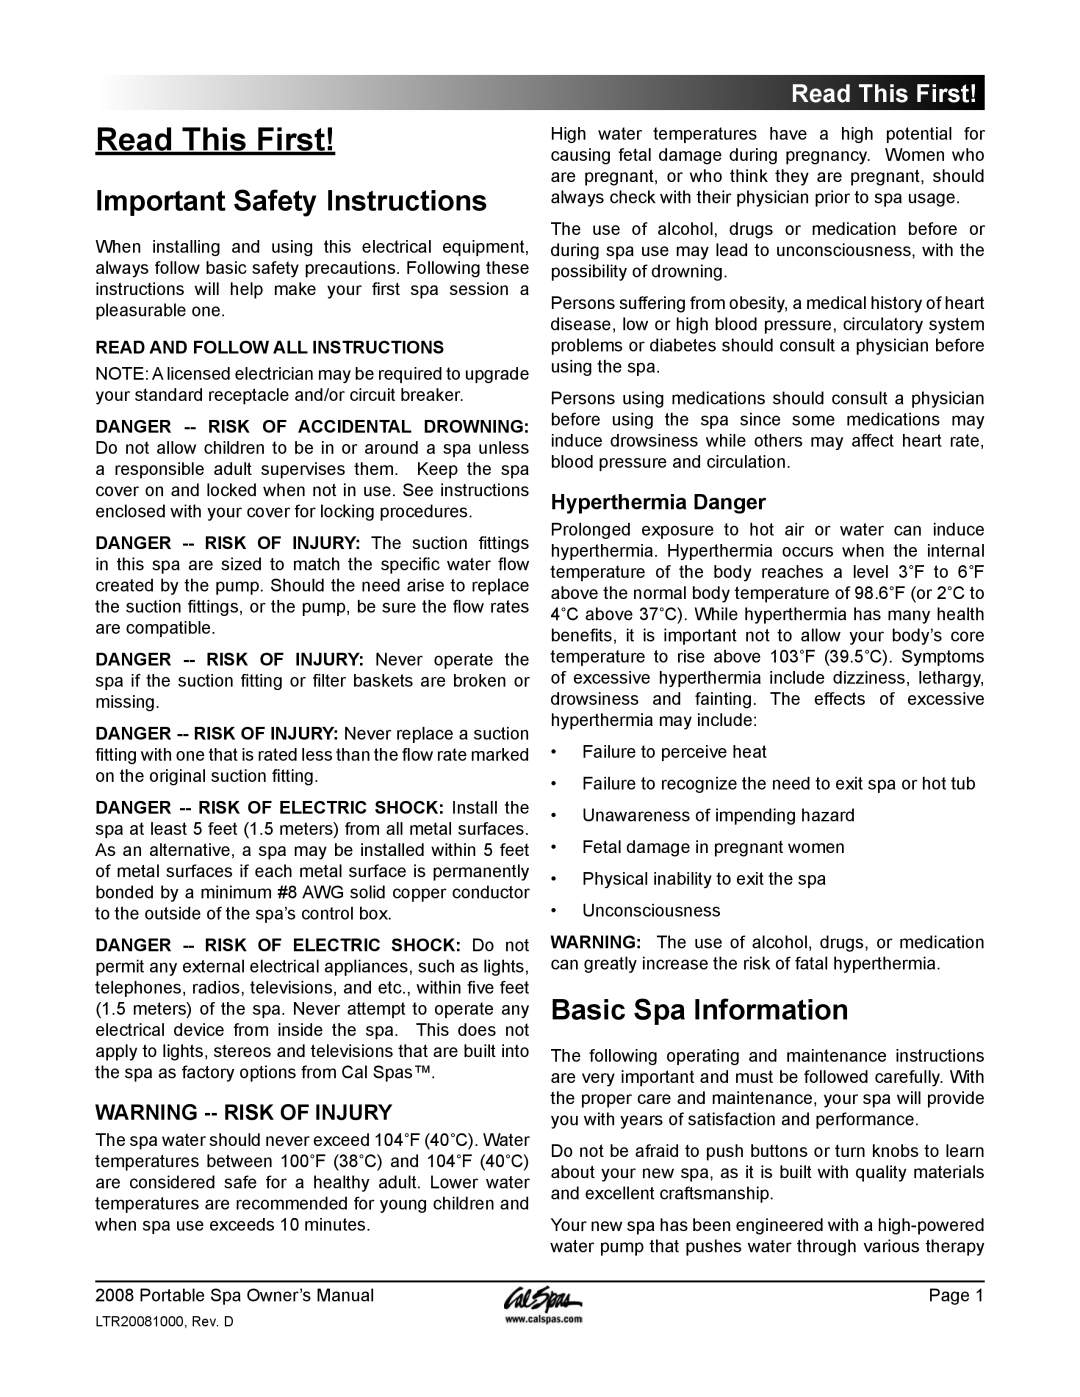 Cal Spas GFCI manual Read This First, Important Safety Instructions, Basic Spa Information, Warning --Risk Of Injury 